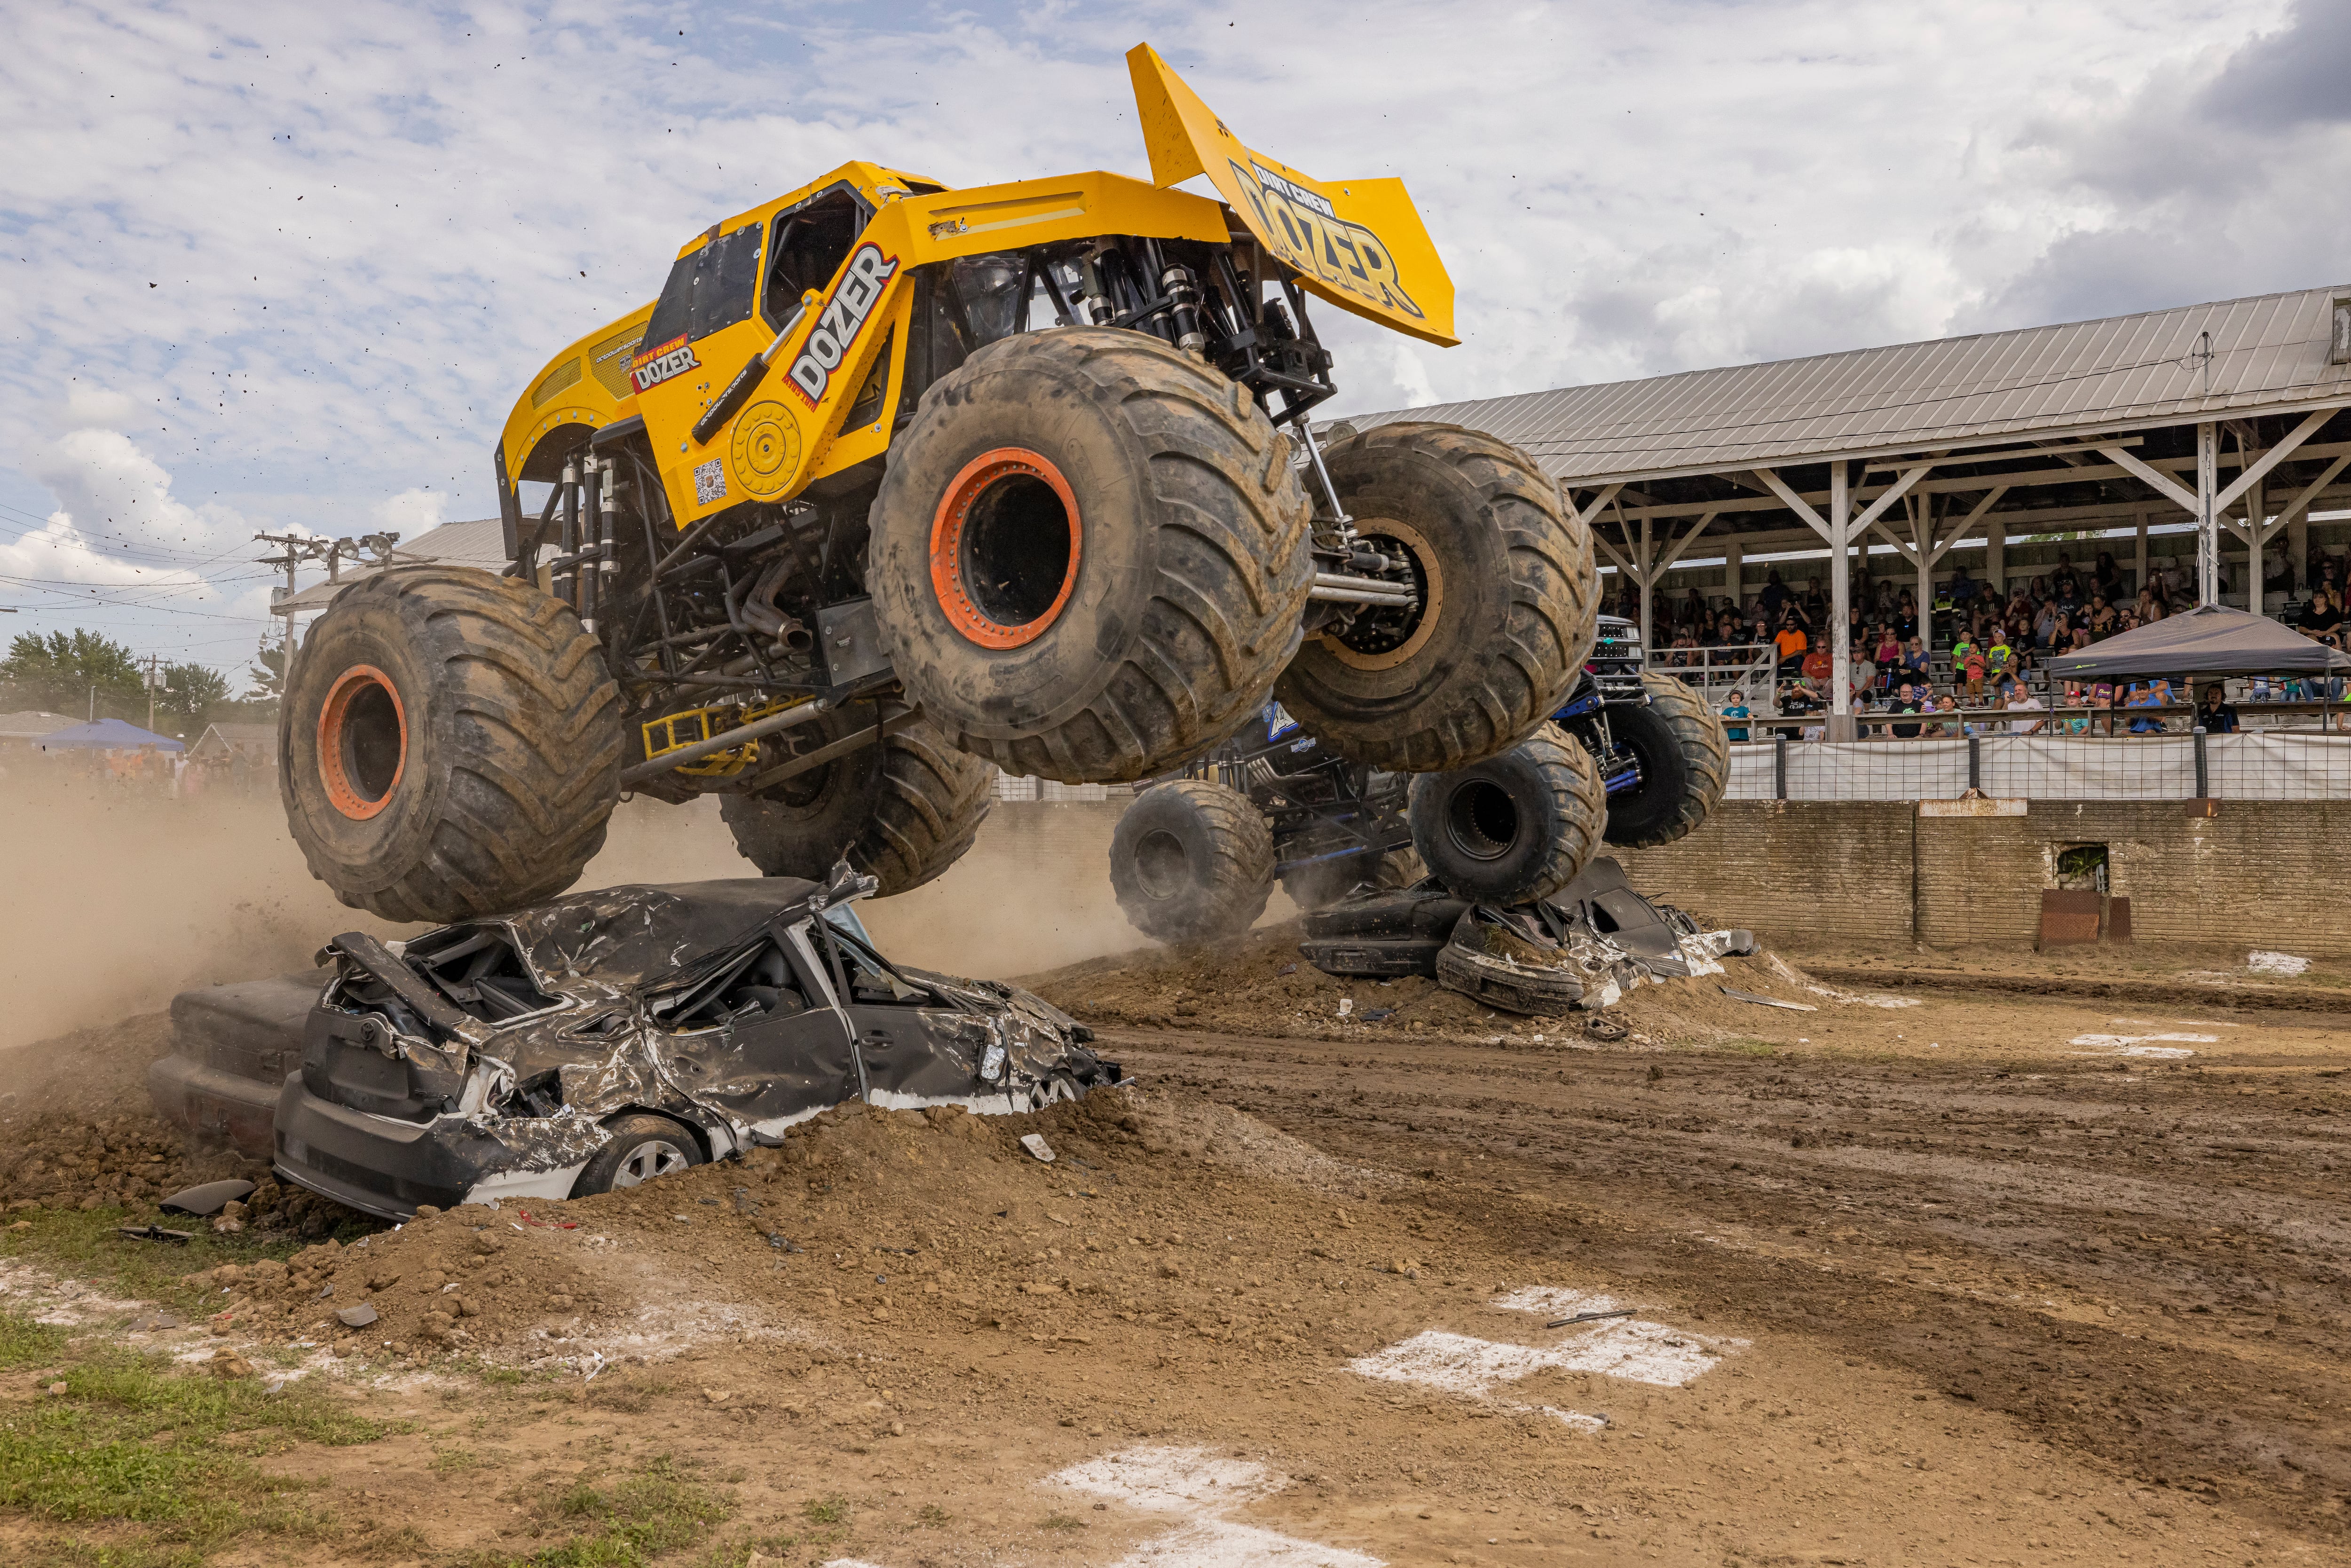 Photos: Monster trucks put on a show in Princeton